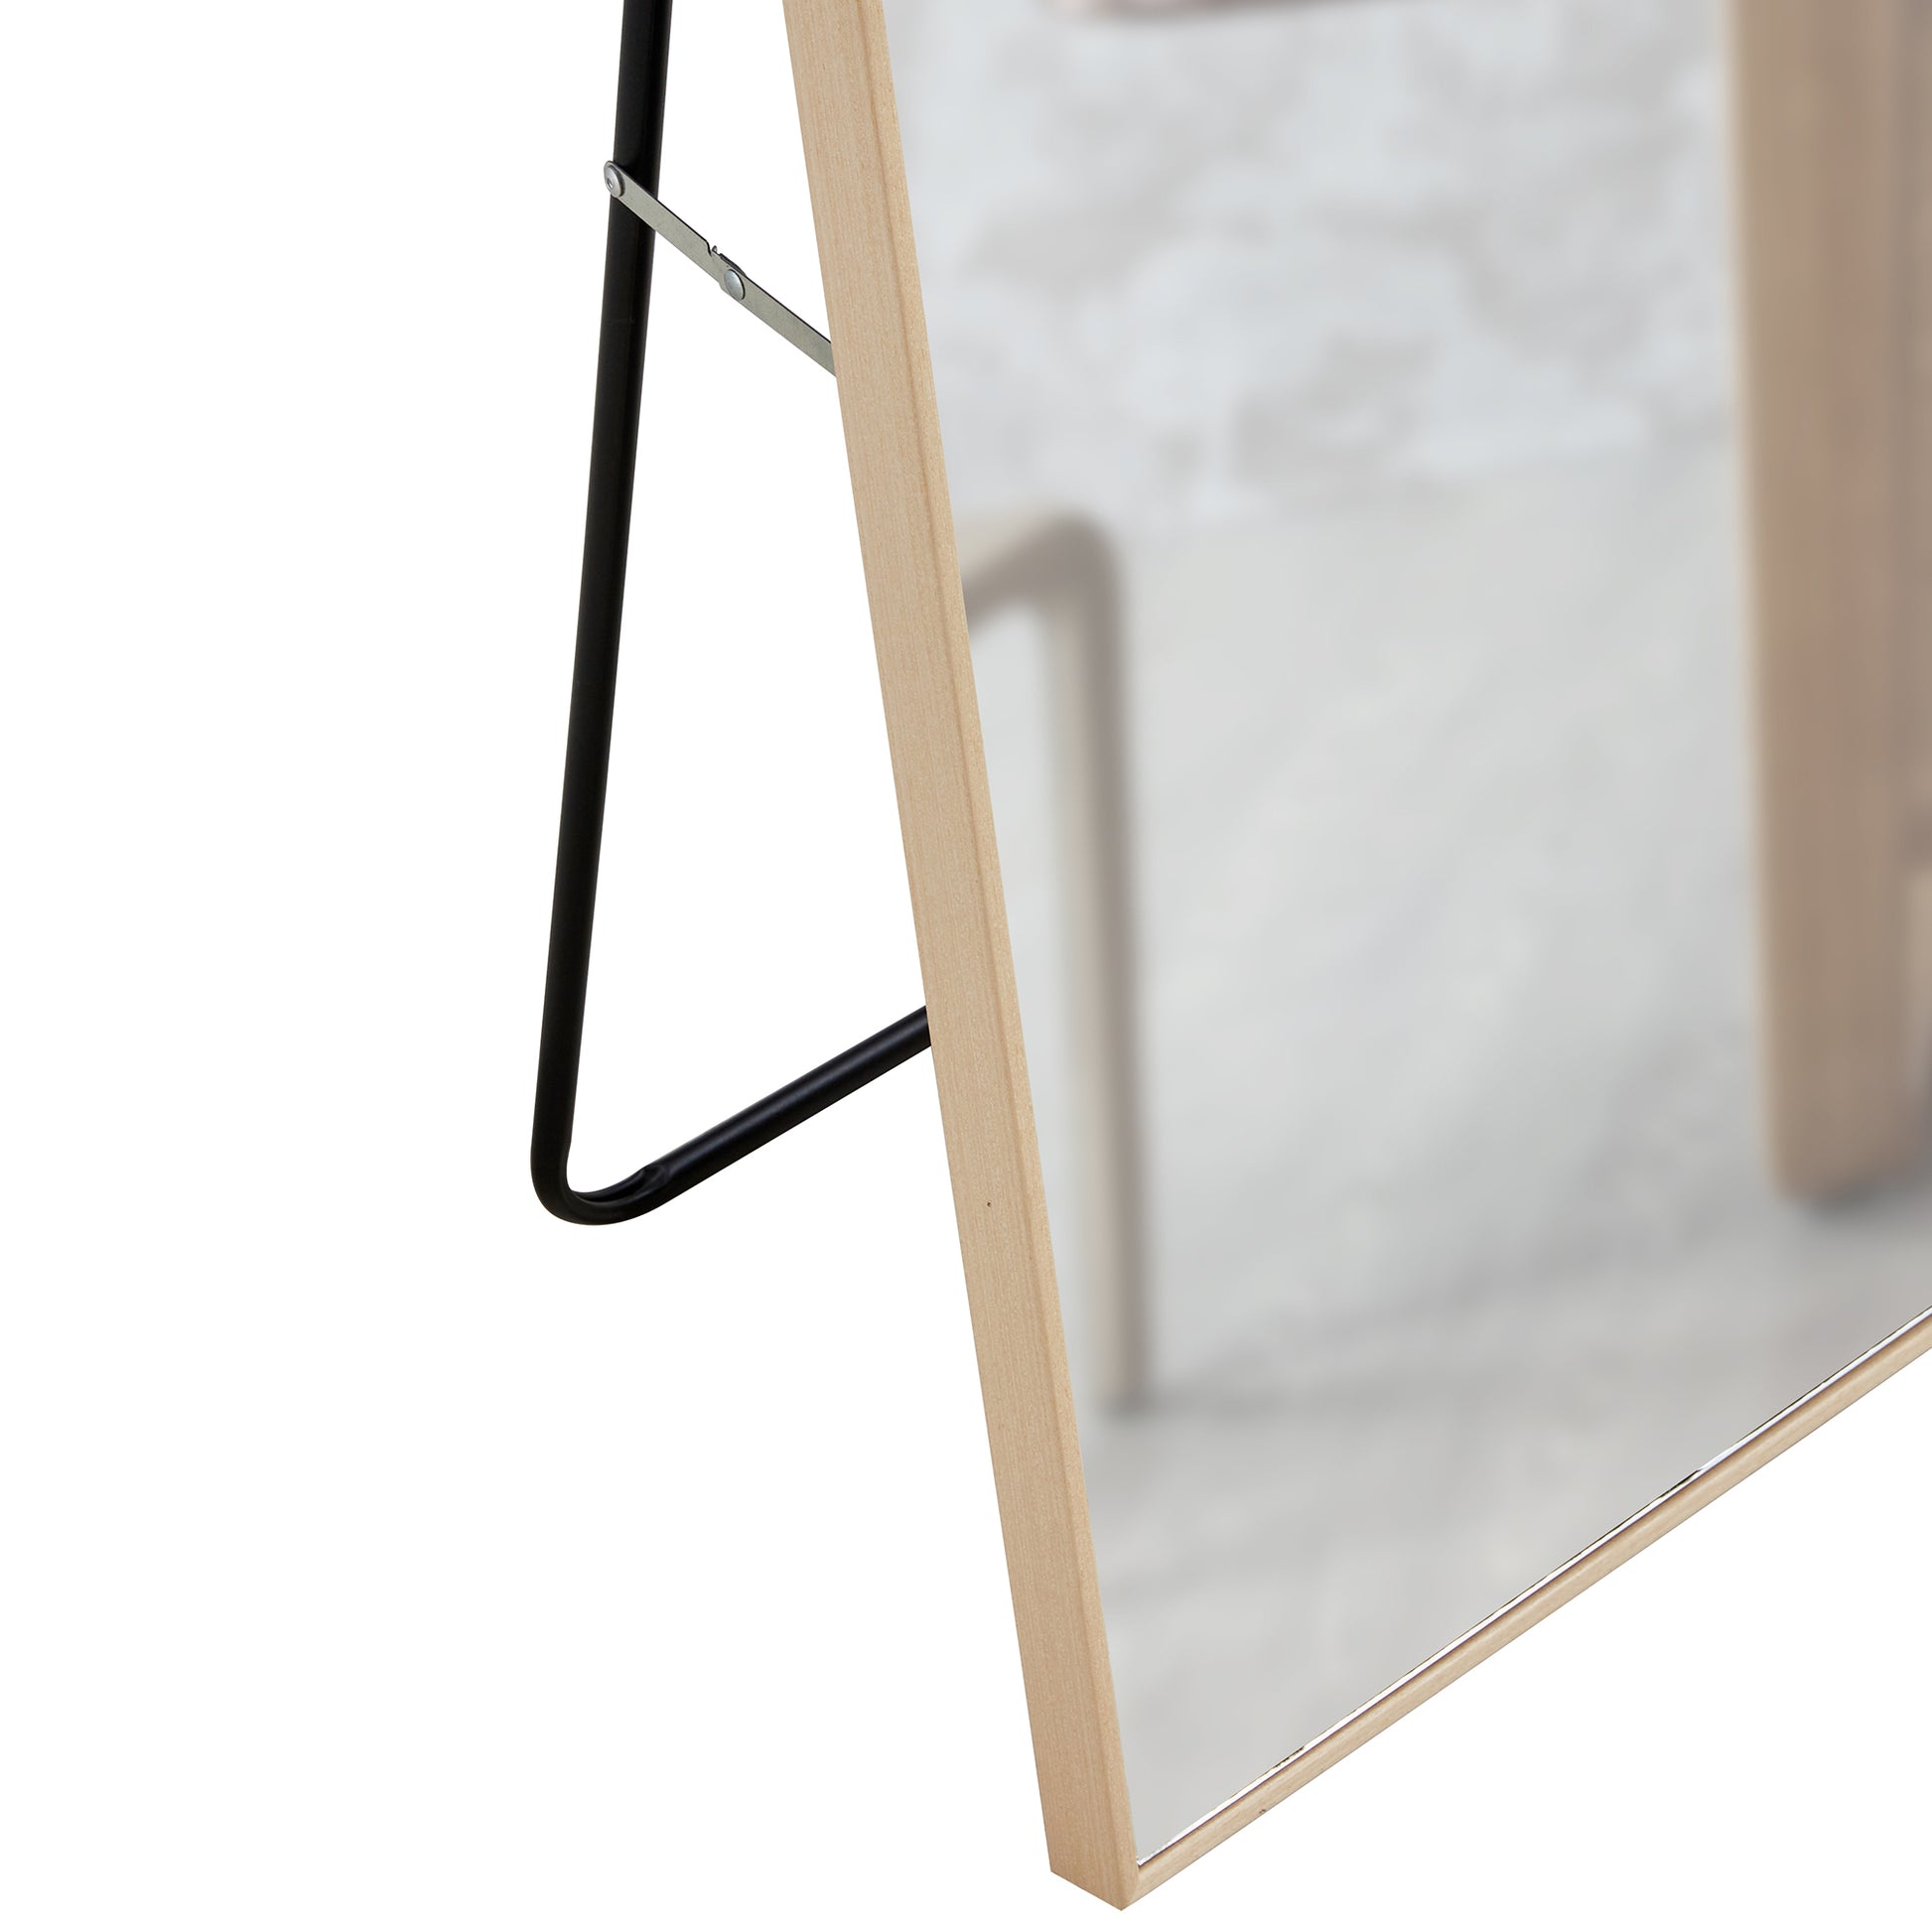 The 3rd generation packaging upgrade includes a light oak solid wood frame full length mirror - Ukerr Home